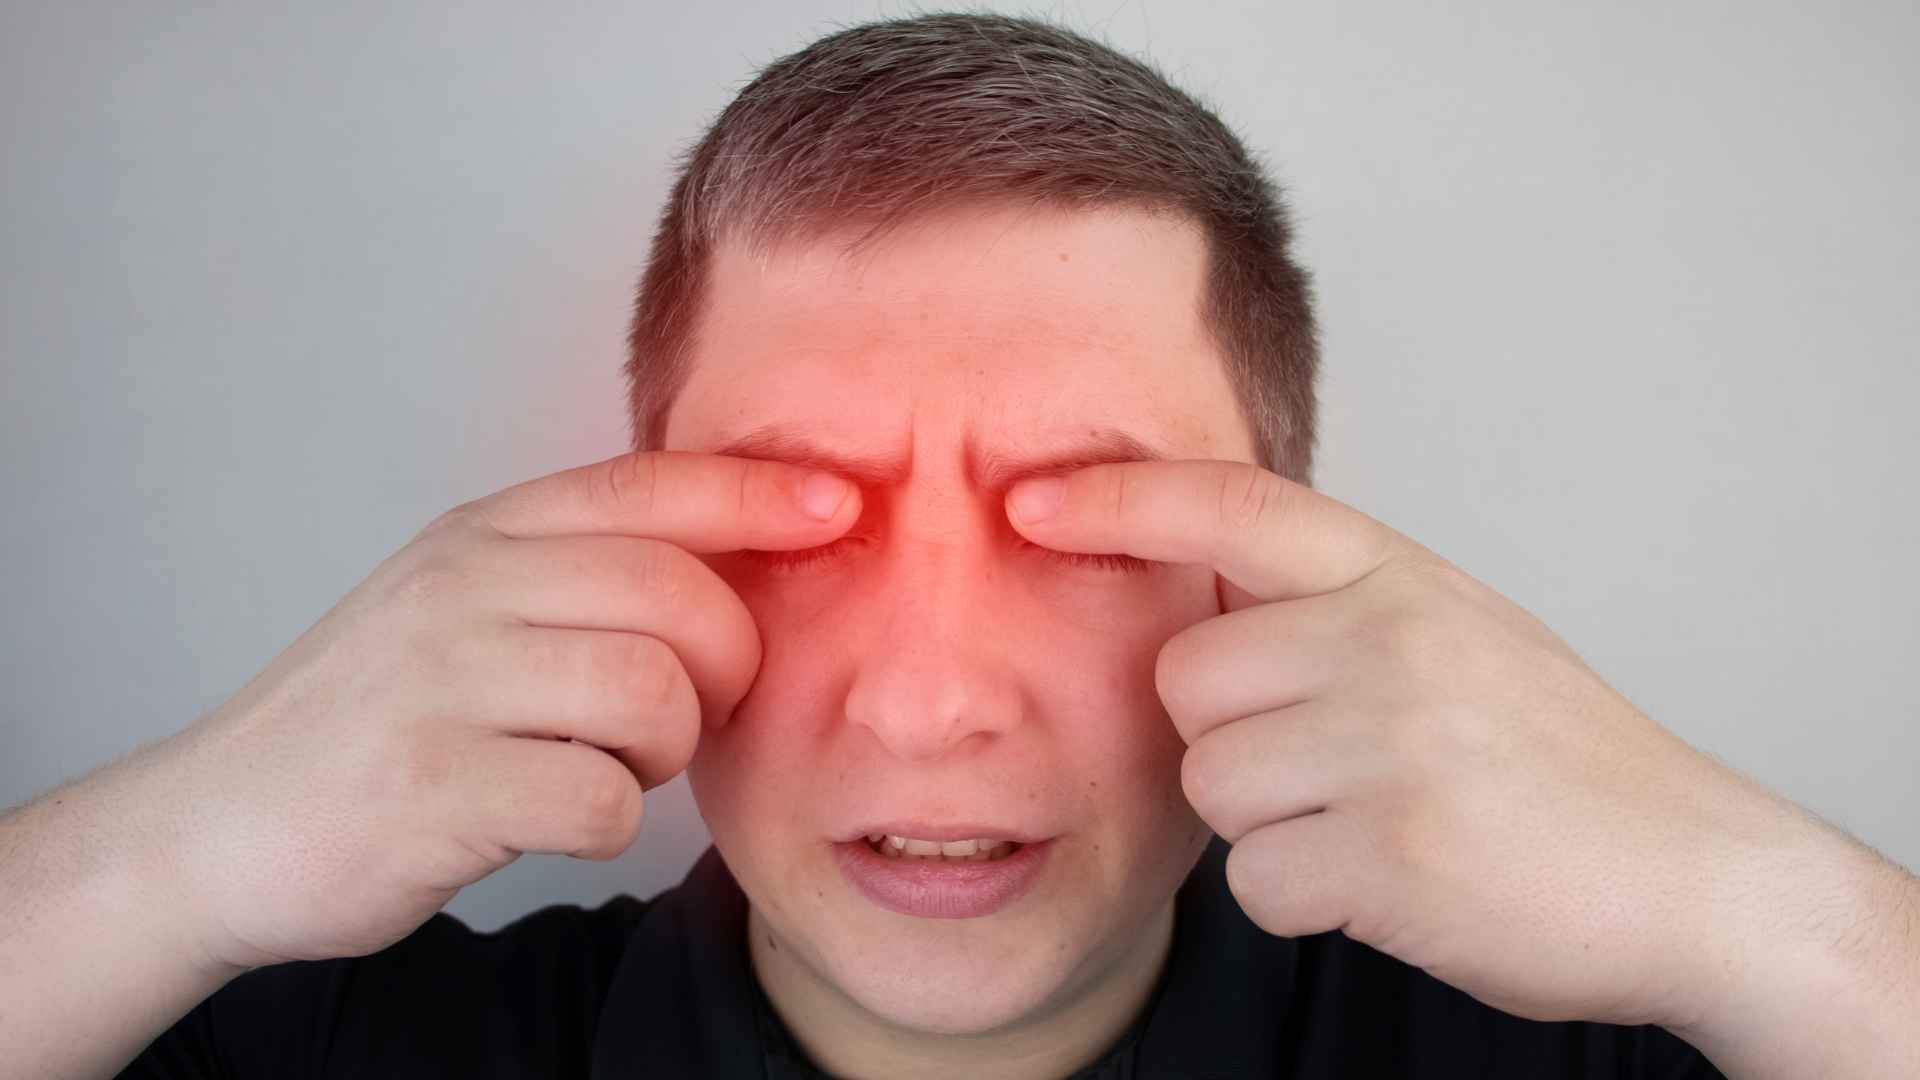 Eye pain in the morning caused by recurrent corneal erosion sydndrome.